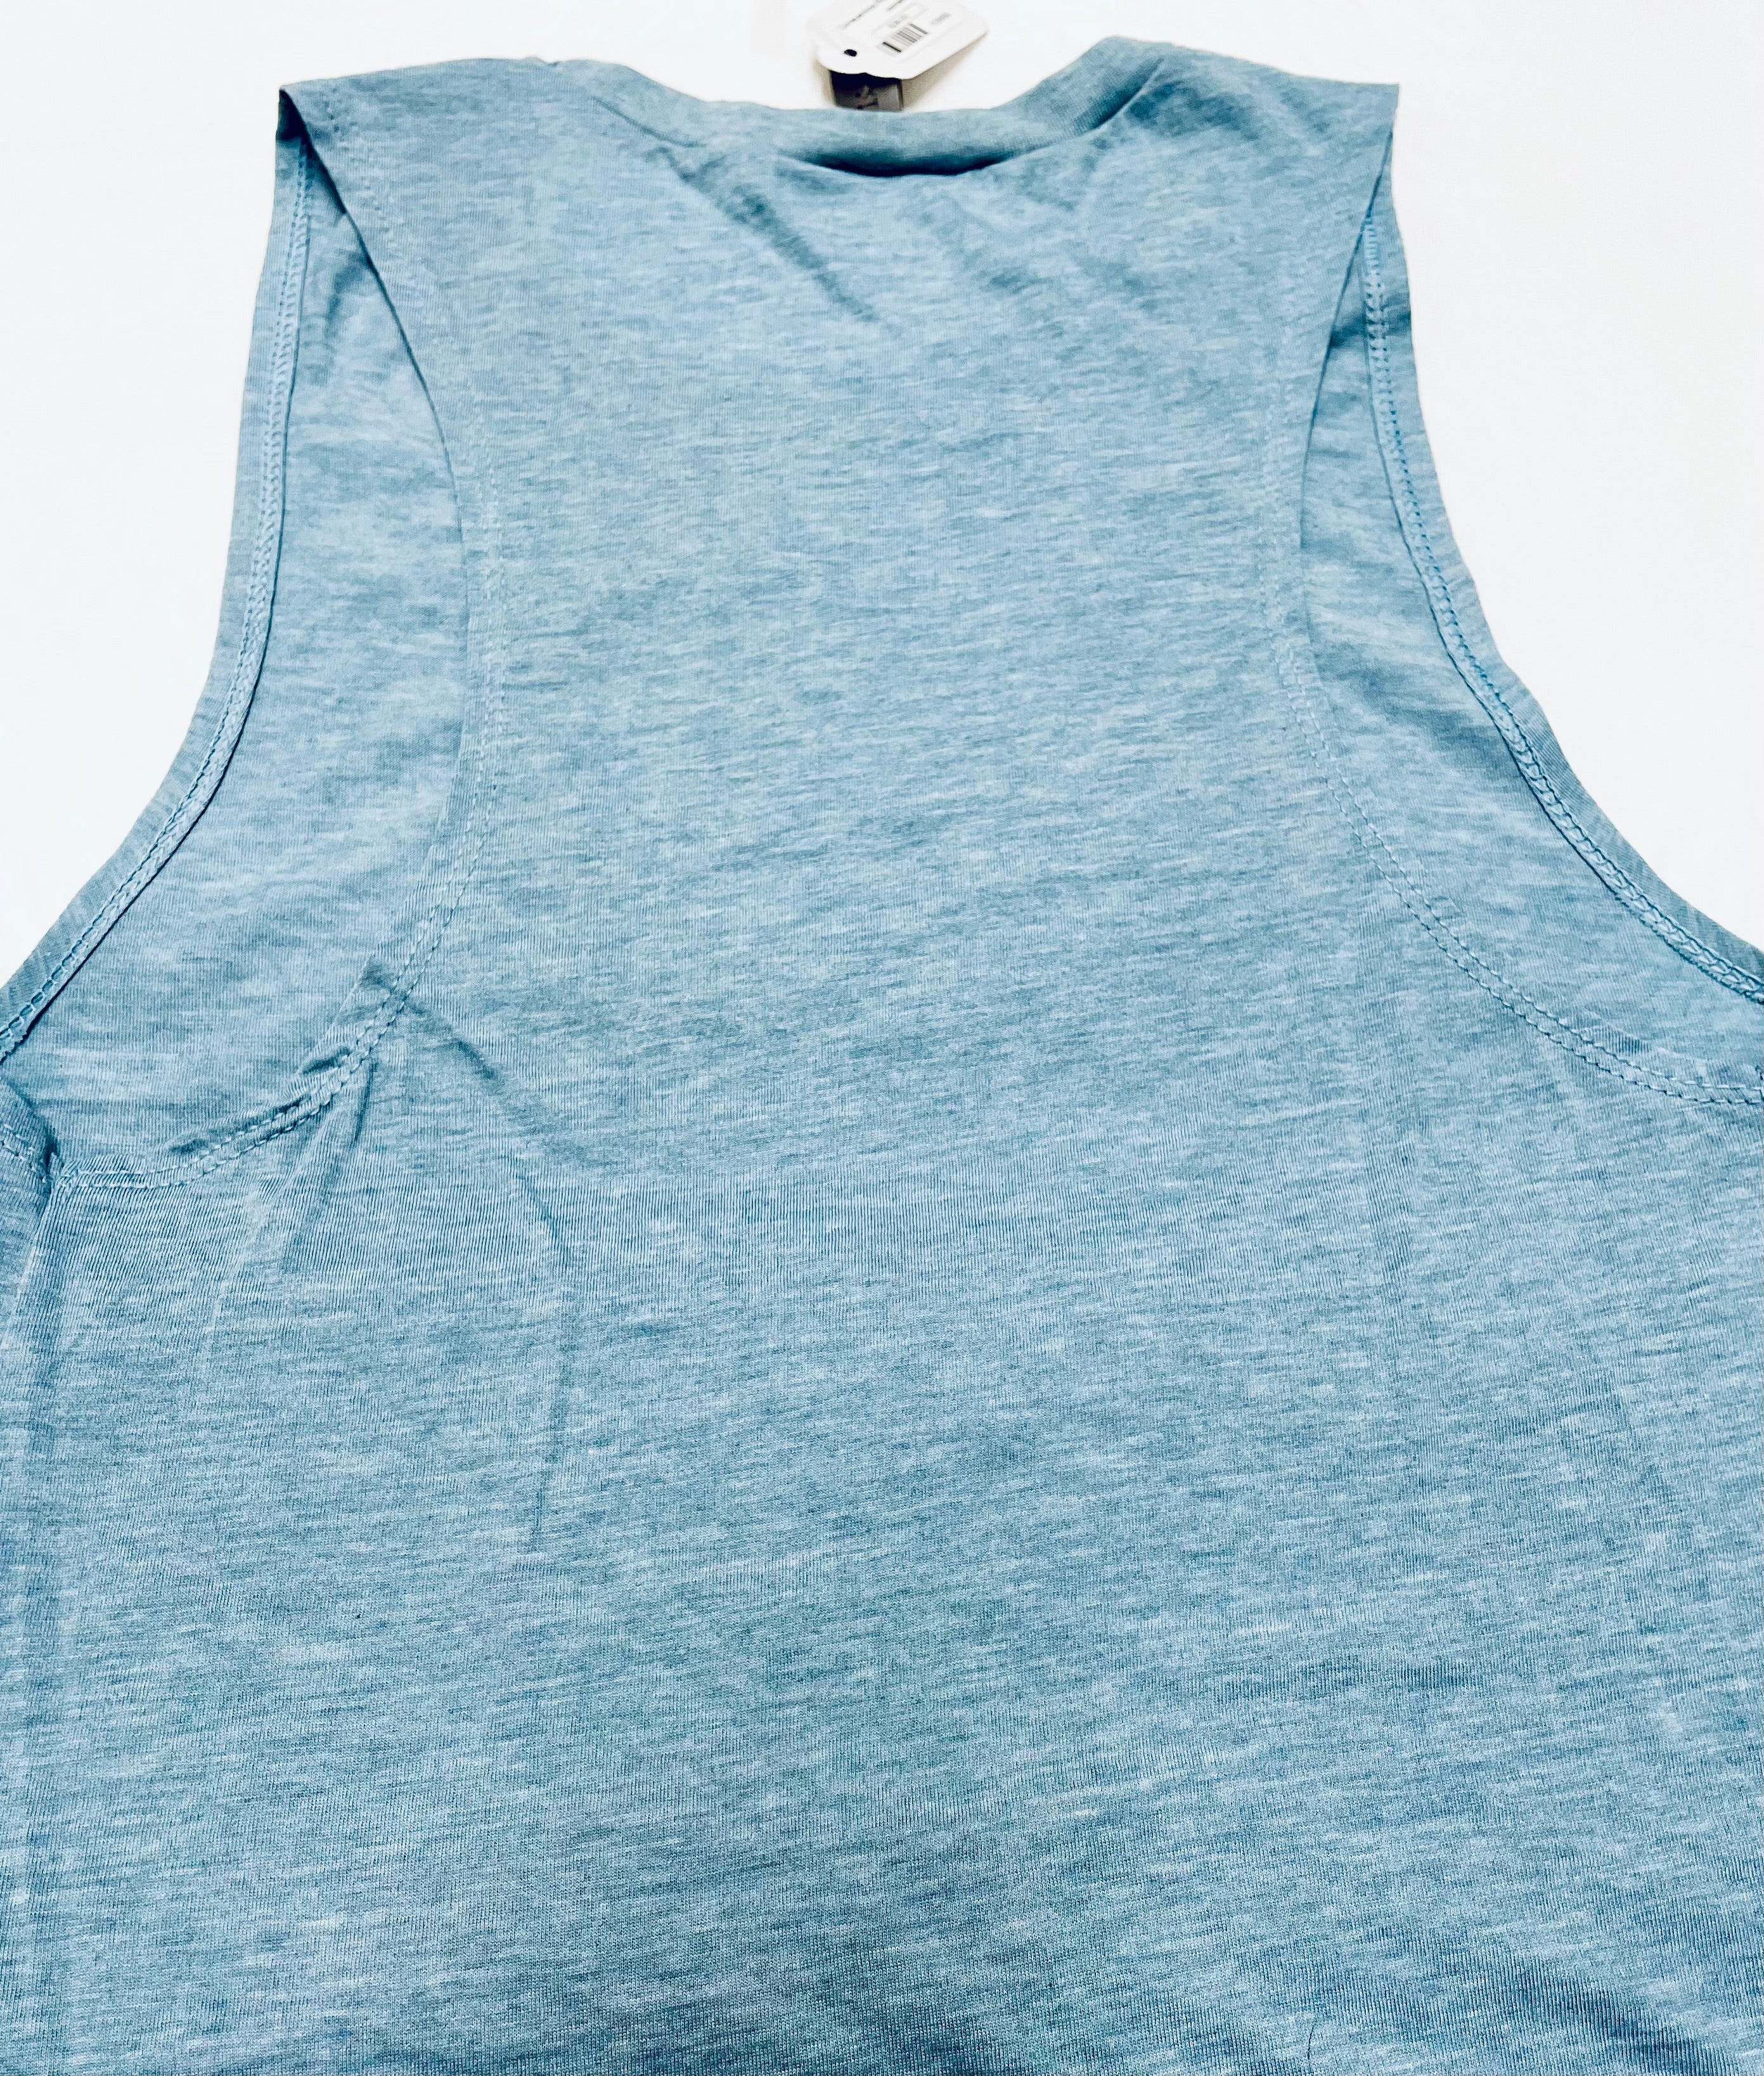 NEW color and style -- Corre Caminos (Roadrunner) Tank